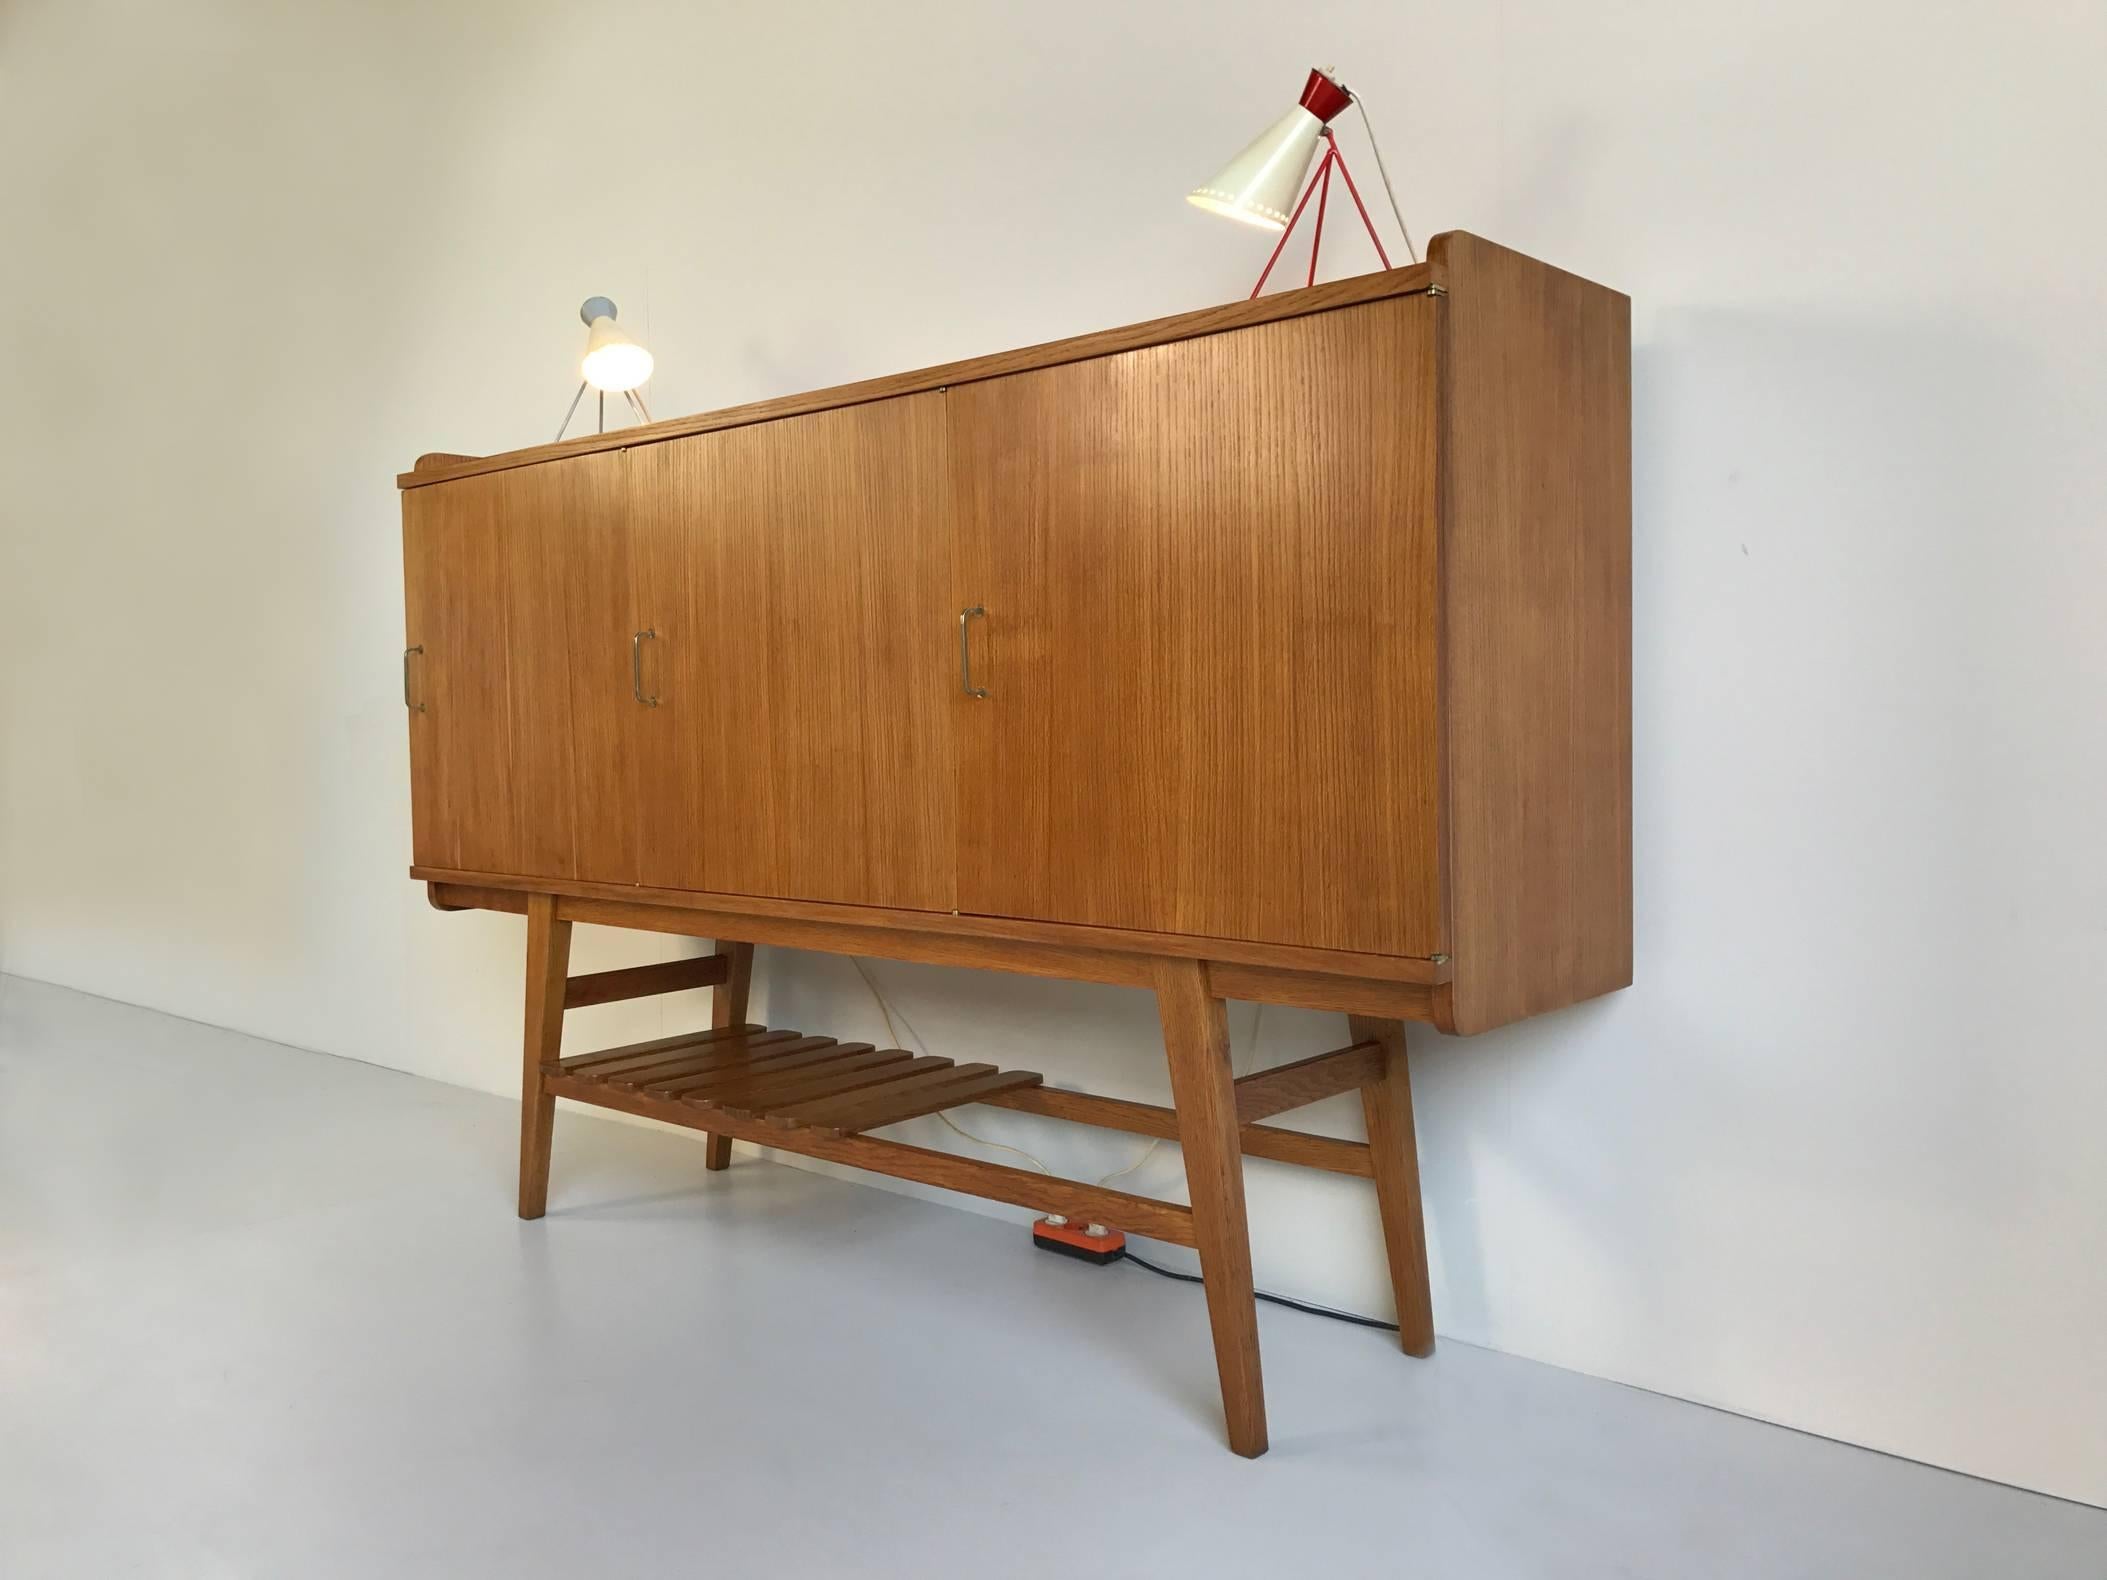 Dating from the period of the French reconstruction, this modernist three-door sideboard is the creation of Jean-René Caillette for Charron, France 1950.
The frame, partially covered with hurdles, is made of solid oak, the box made of oak veneer.